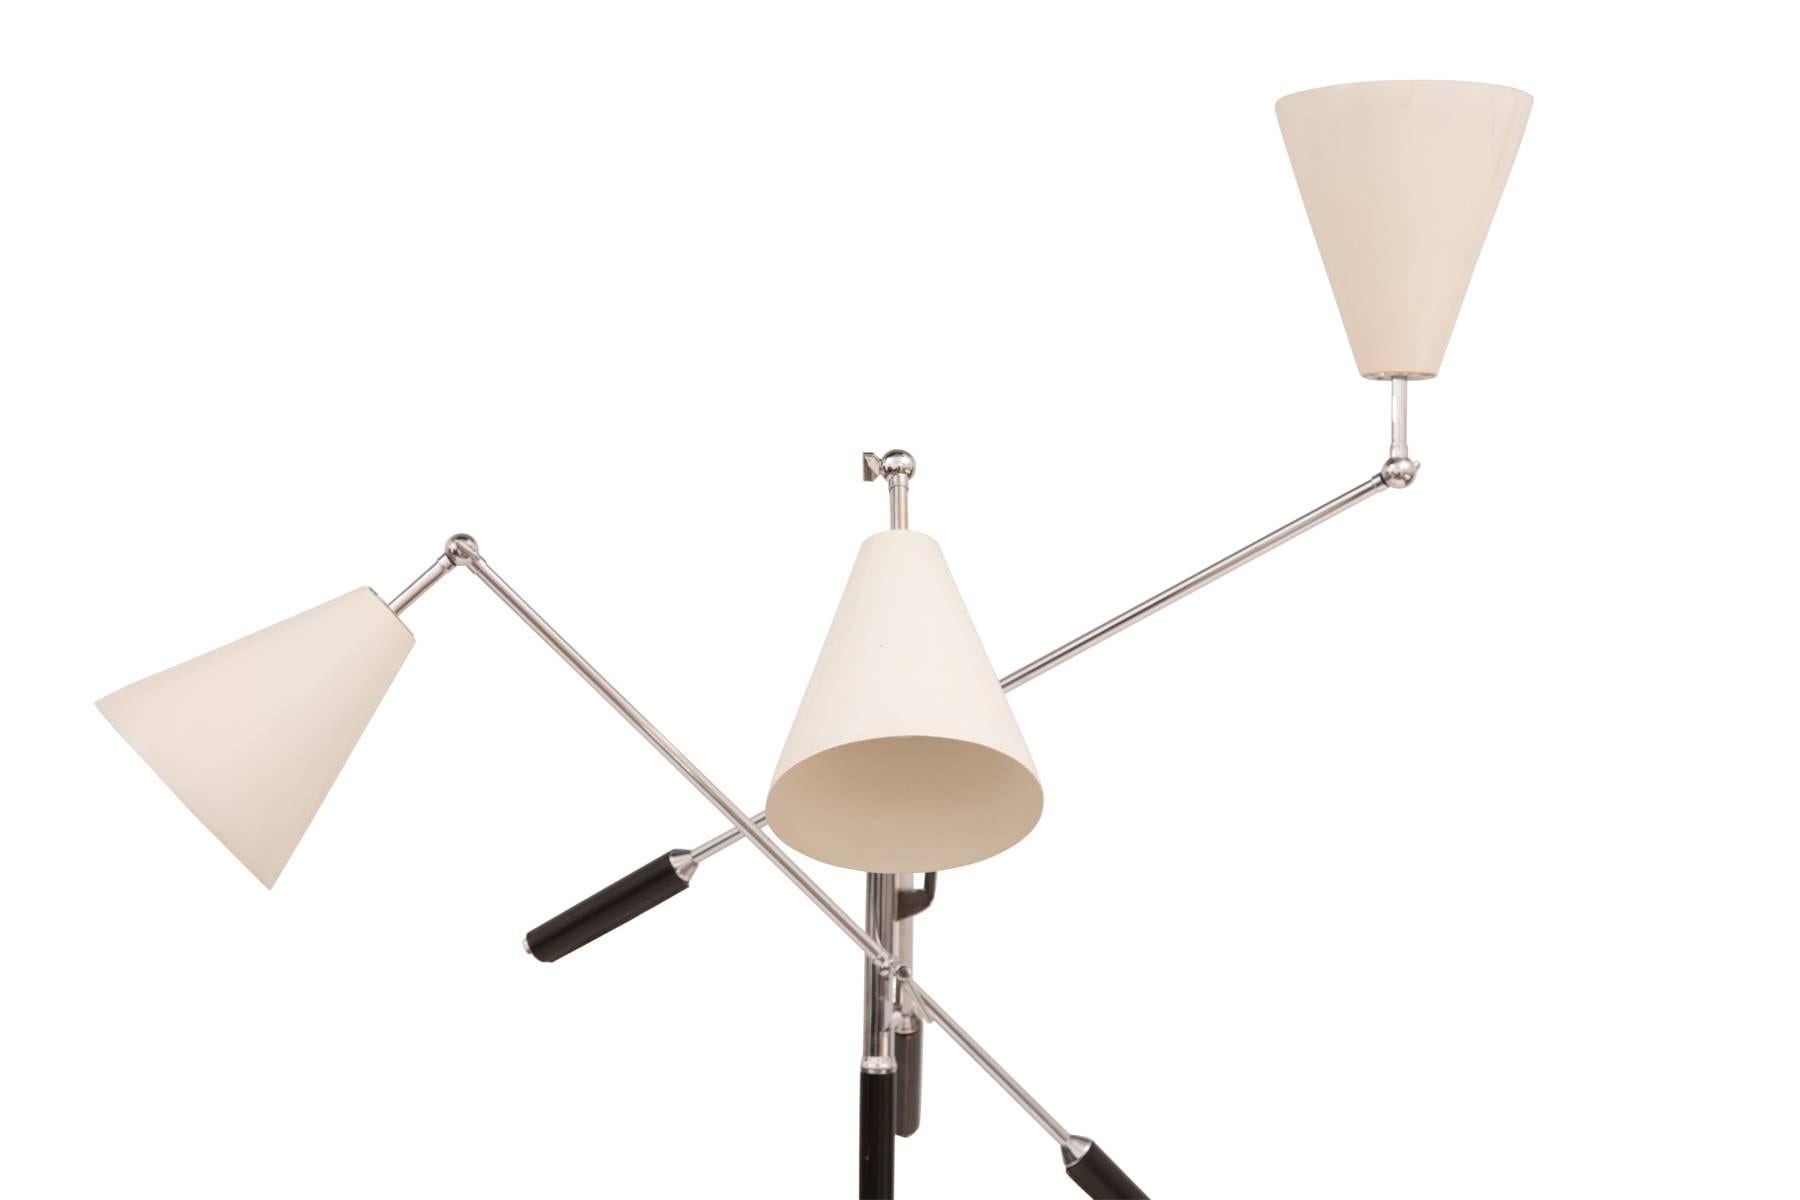 Arredoluce three-arm floor lamp, circa late 1960s. This example has a Carrara marble base chrome stem and arms with patinated hand sewn leather handles. The cream cones retain their original finish and the lamp is stamped made in Italy on the top of